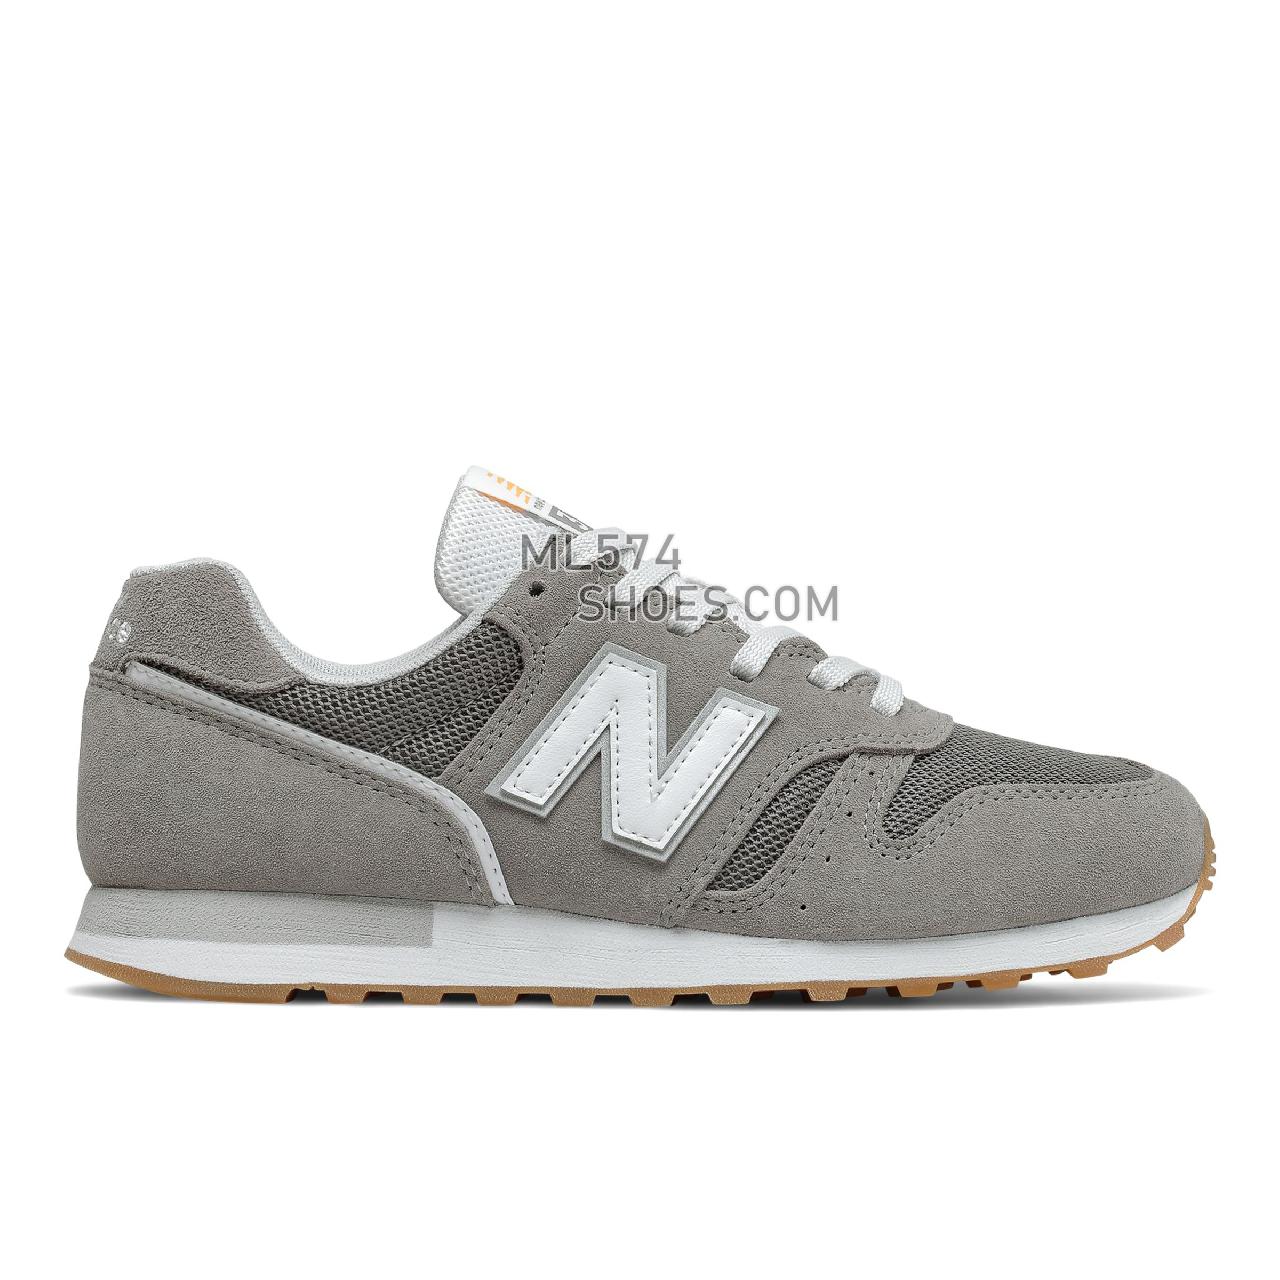 New Balance 373V2 - Women's Classic Sneakers - Bone with White - WL373HL2